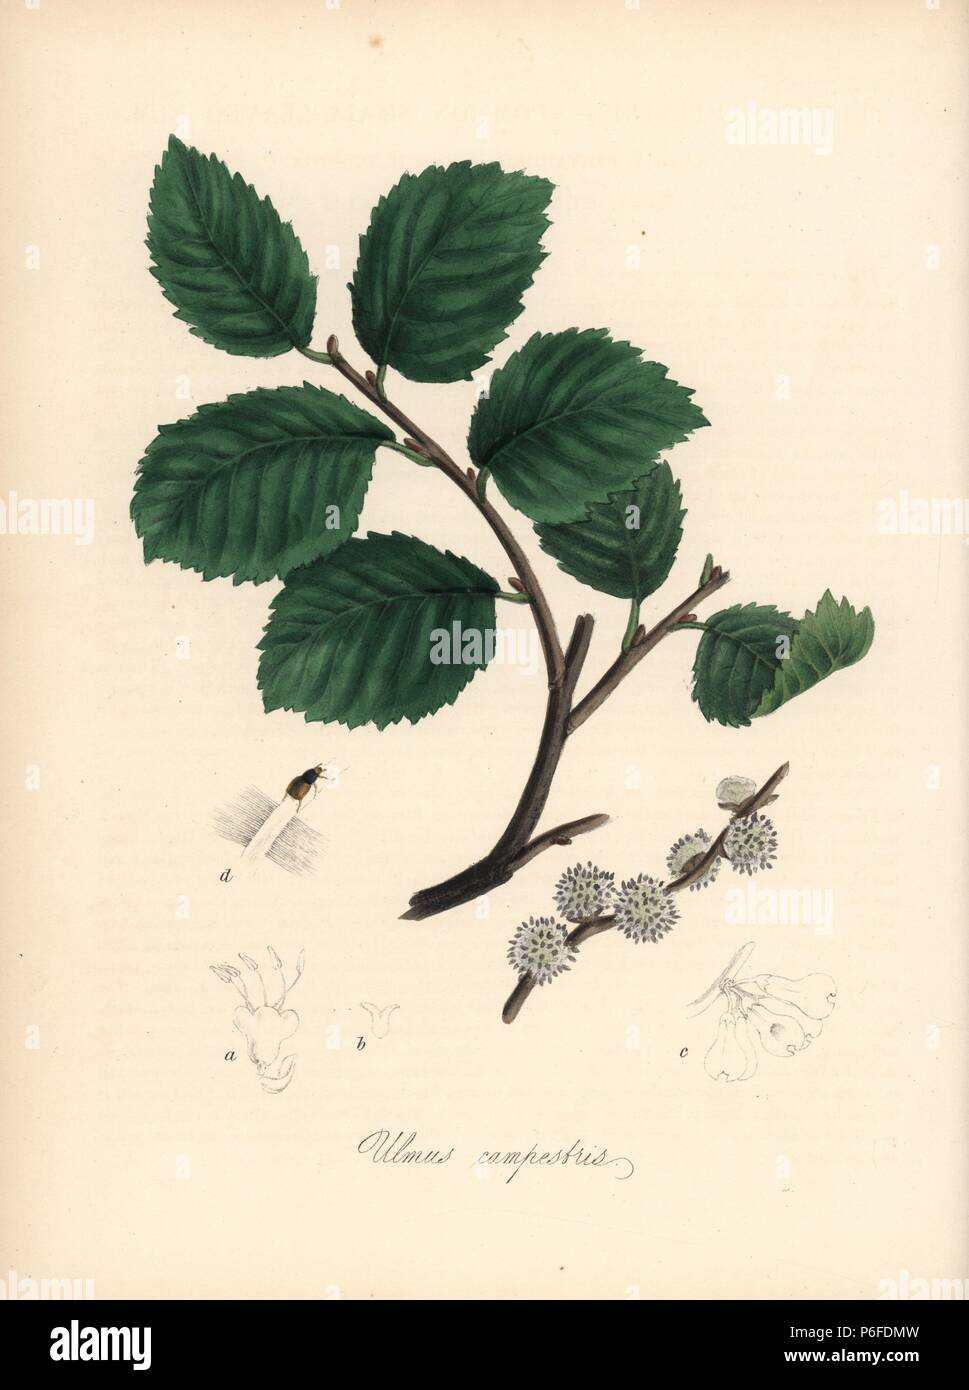 Common small-leaved elm tree, Ulmus campestris, with flower, leaf and elm bark beetle, Scolytus multistriatus. Handcoloured zincograph by C. Chabot drawn by Miss M. A. Burnett from her 'Plantae Utiliores: or Illustrations of Useful Plants,' Whittaker, London, 1842. Miss Burnett drew the botanical illustrations, but the text was chiefly by her late brother, British botanist Gilbert Thomas Burnett (1800-1835). Stock Photo